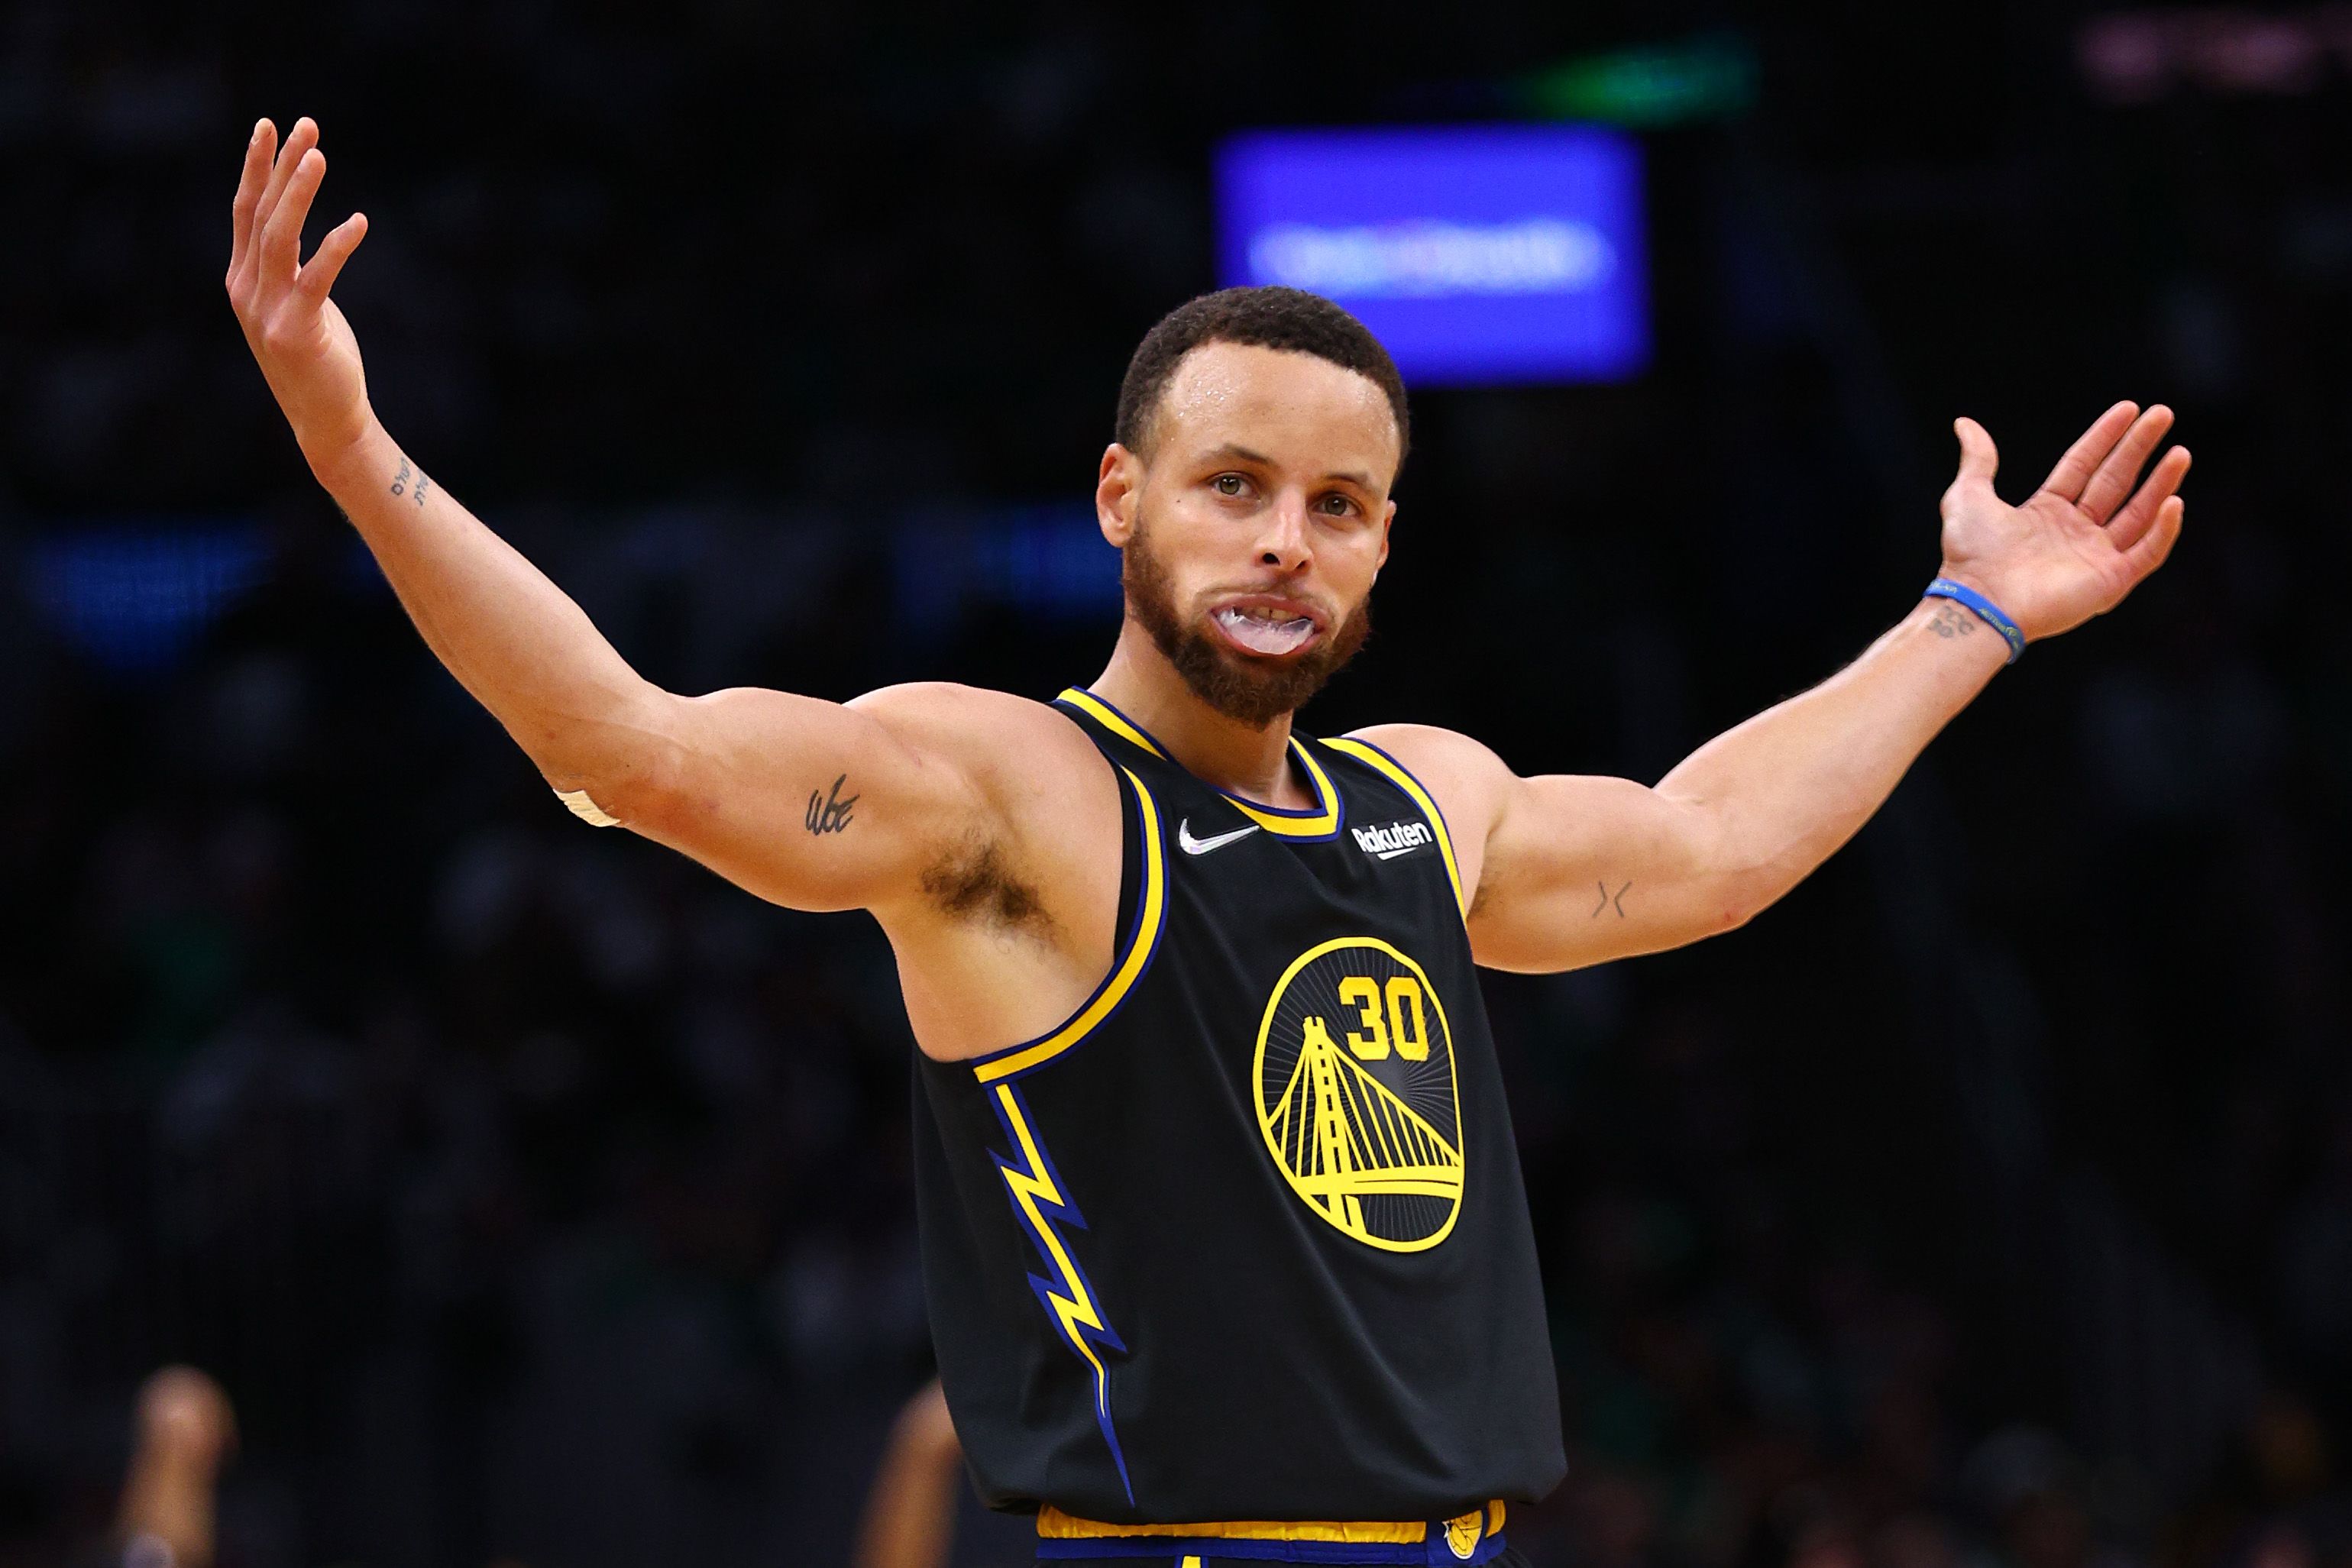 Steph Curry becomes the first player NBA history to reach 3,700 threes